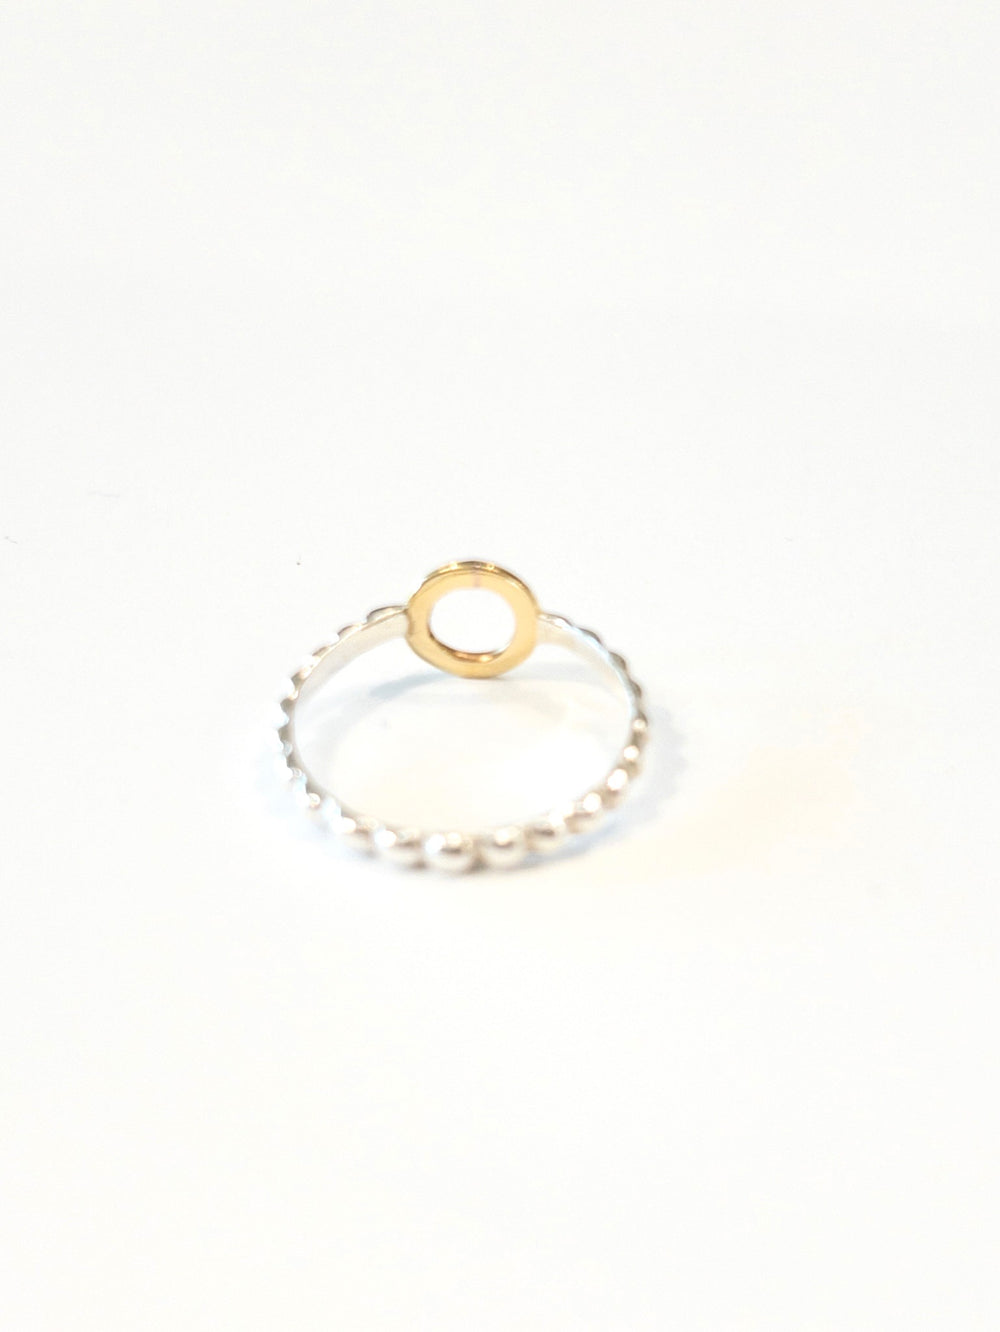 Better Together ring - nh- Gold Circle silver rope band